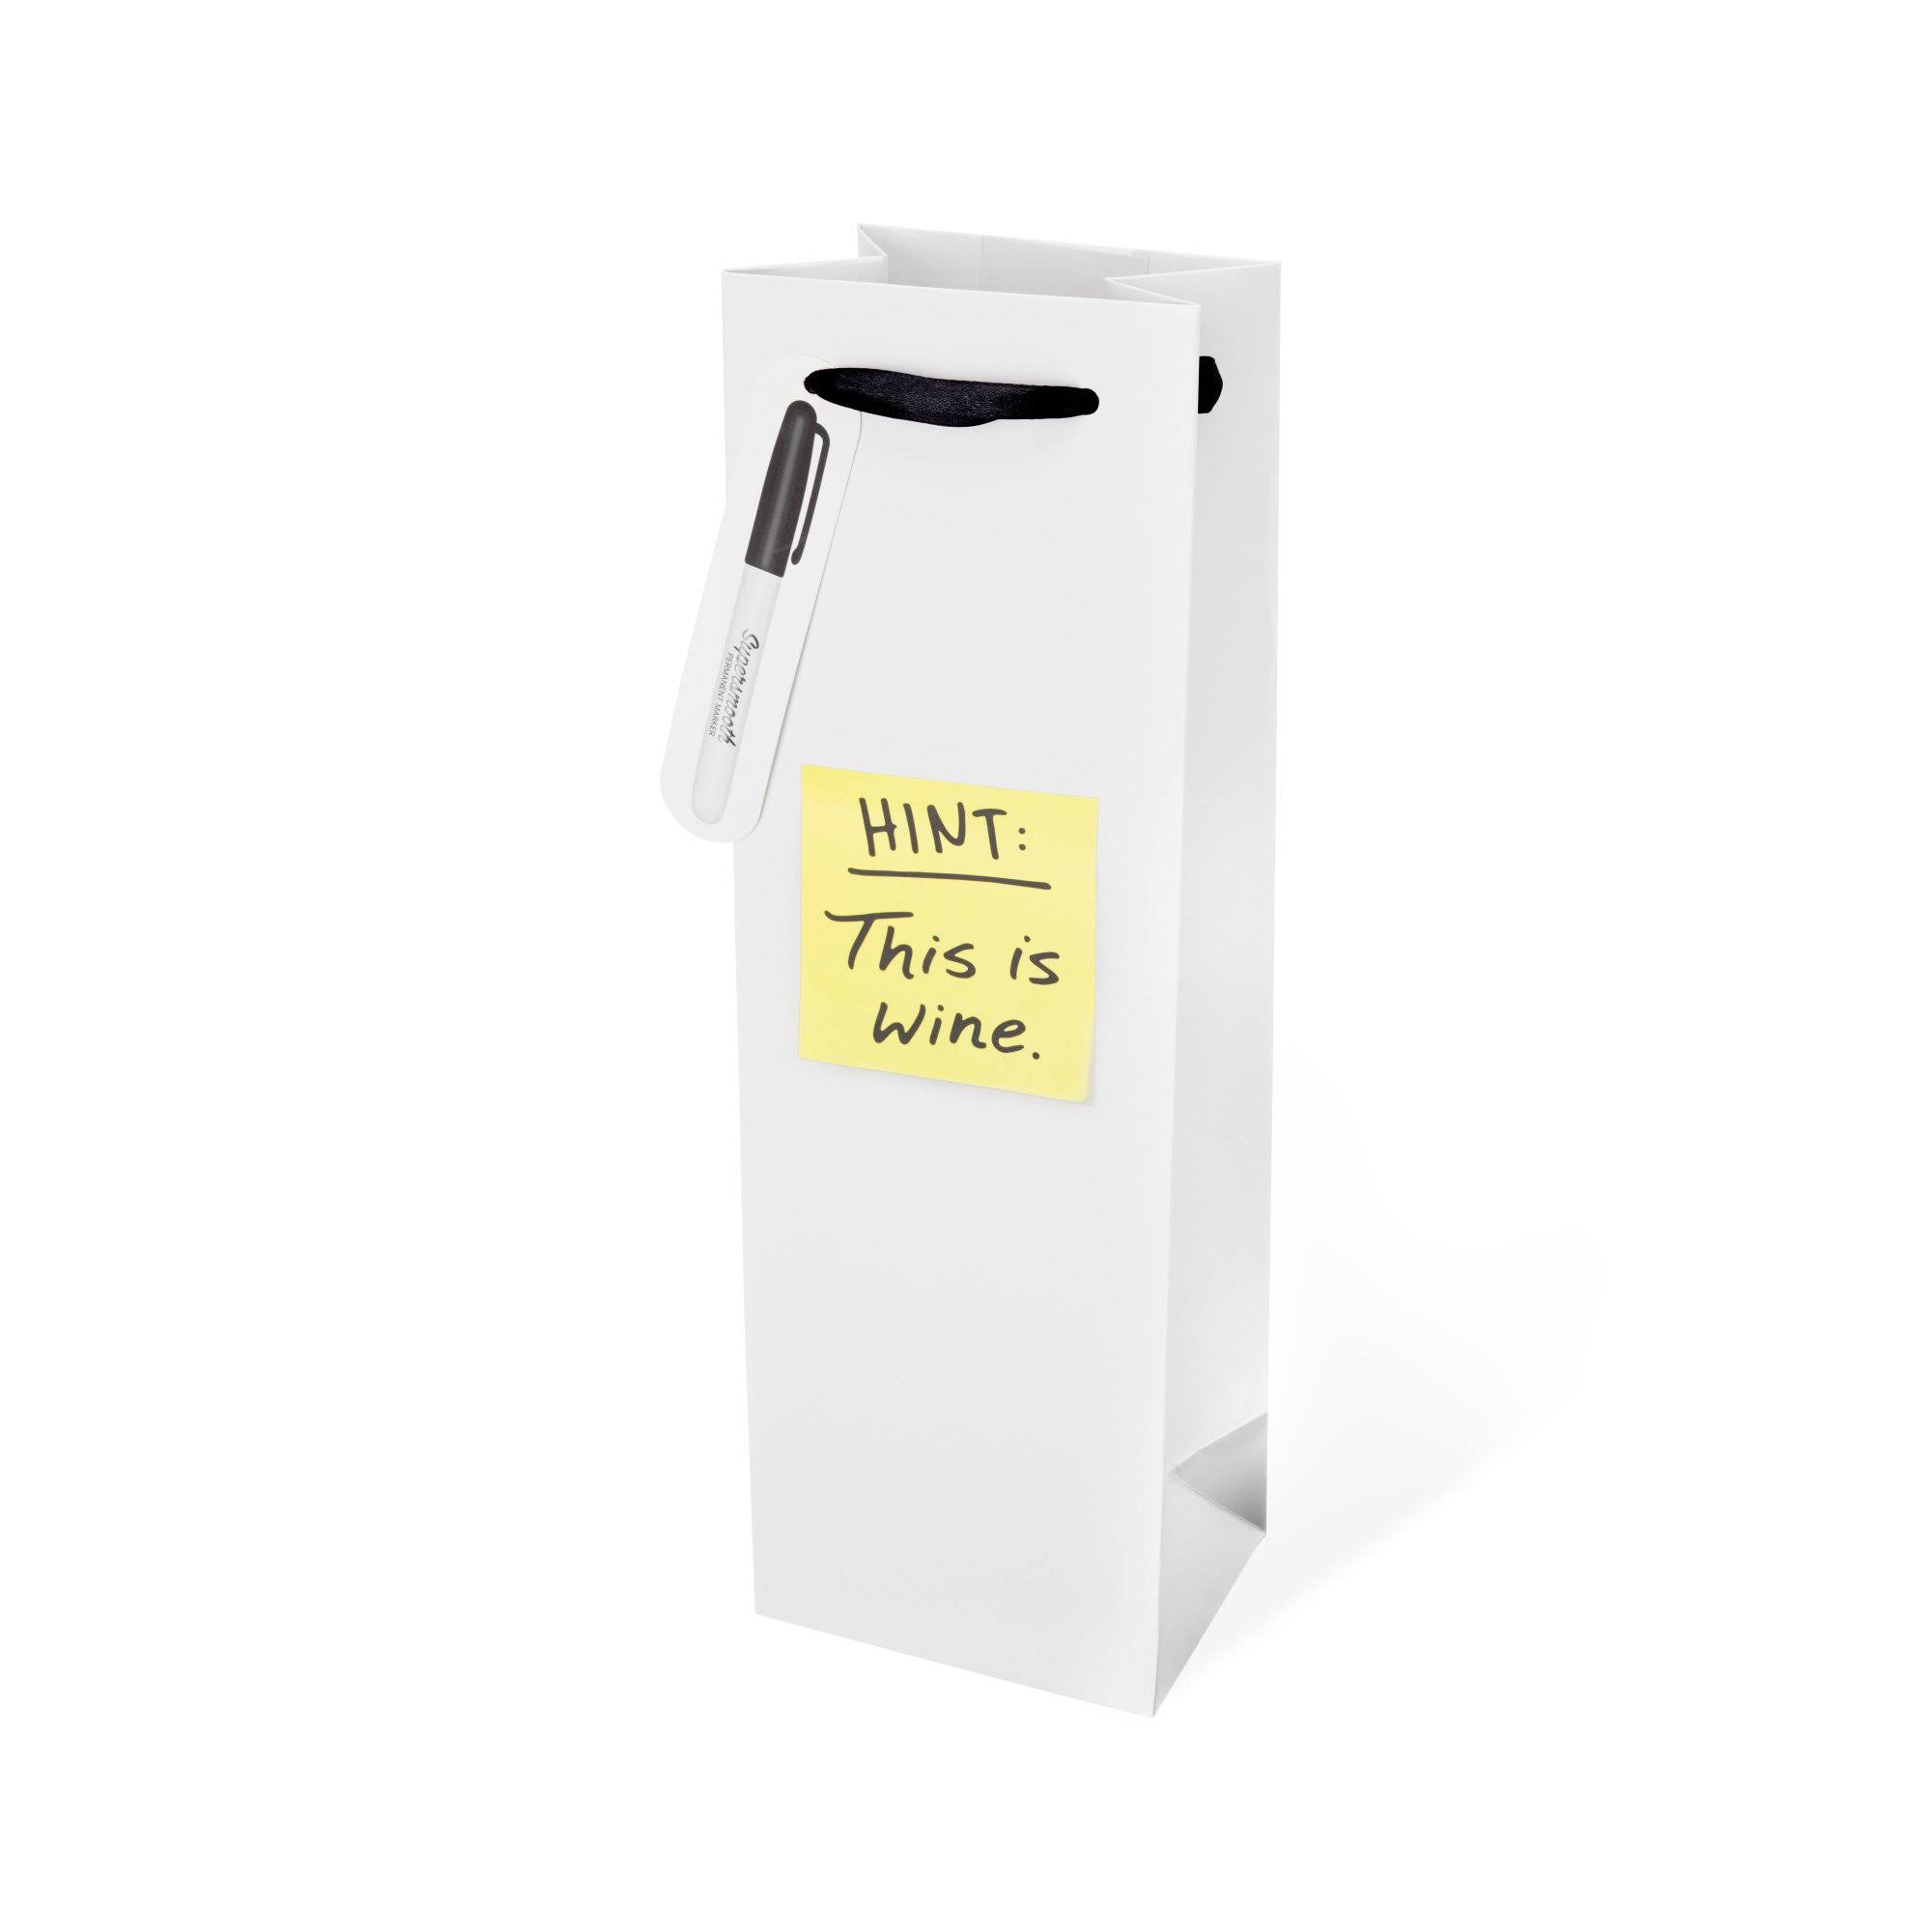 HINT: This Is Wine Single-Bottle Wine Bag by Cakewalk White Paper Gift Bags